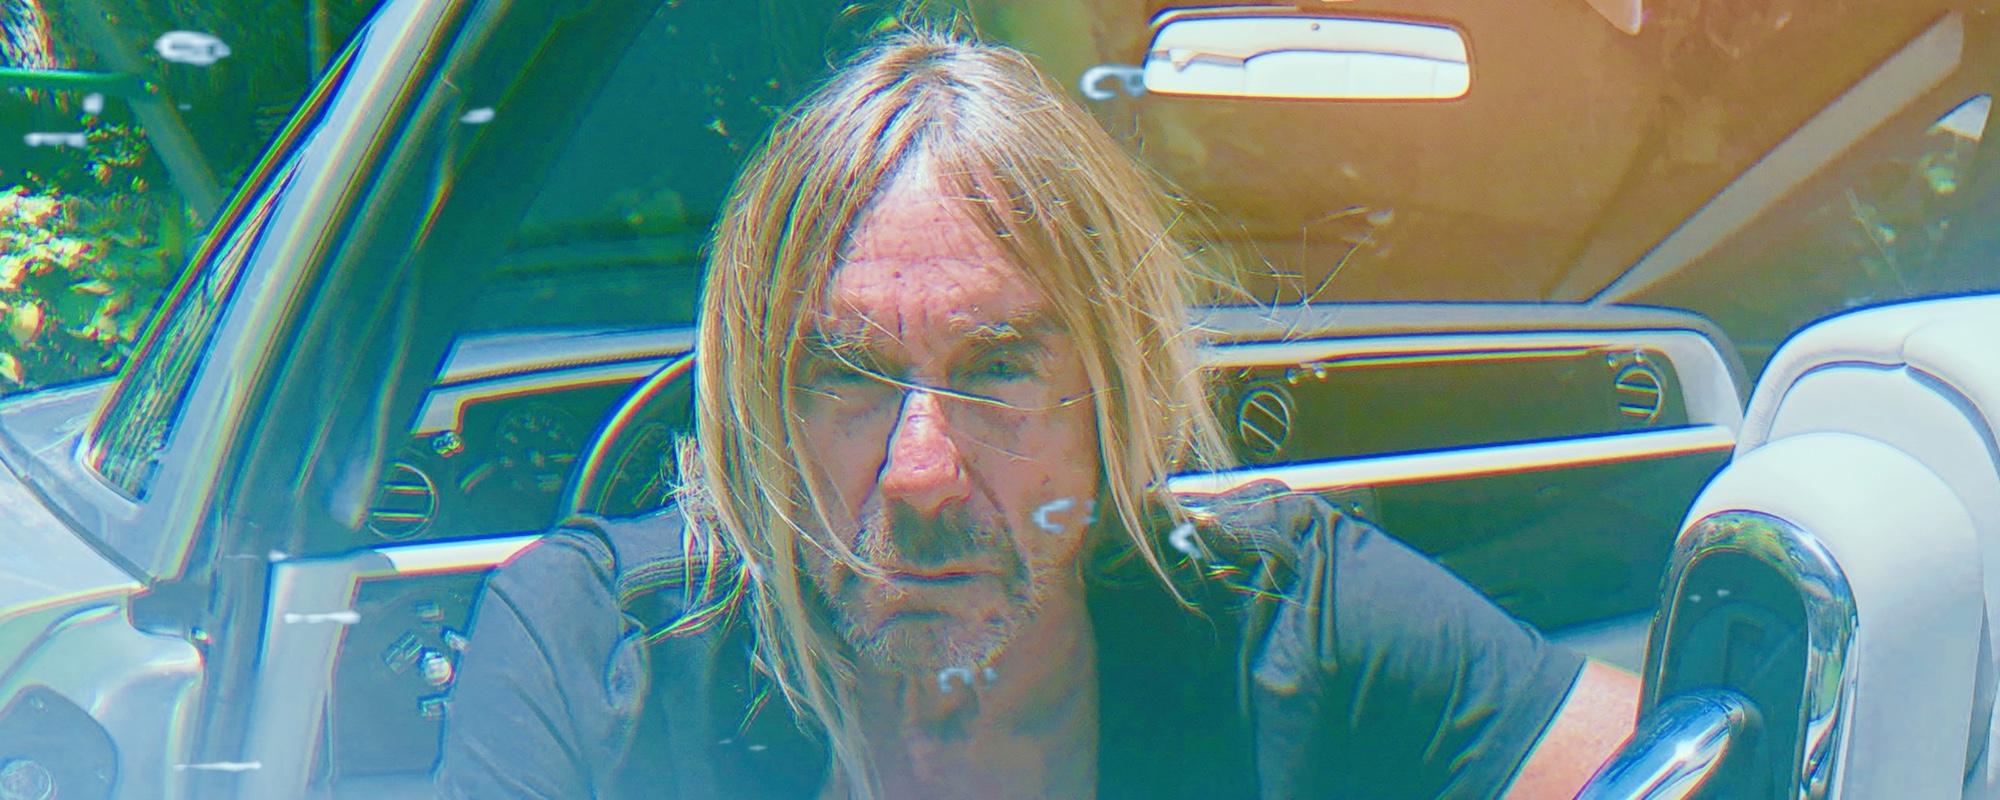 Iggy Pop to Play Inaugural Punk Rock Festival in Dominican Republic in 2023